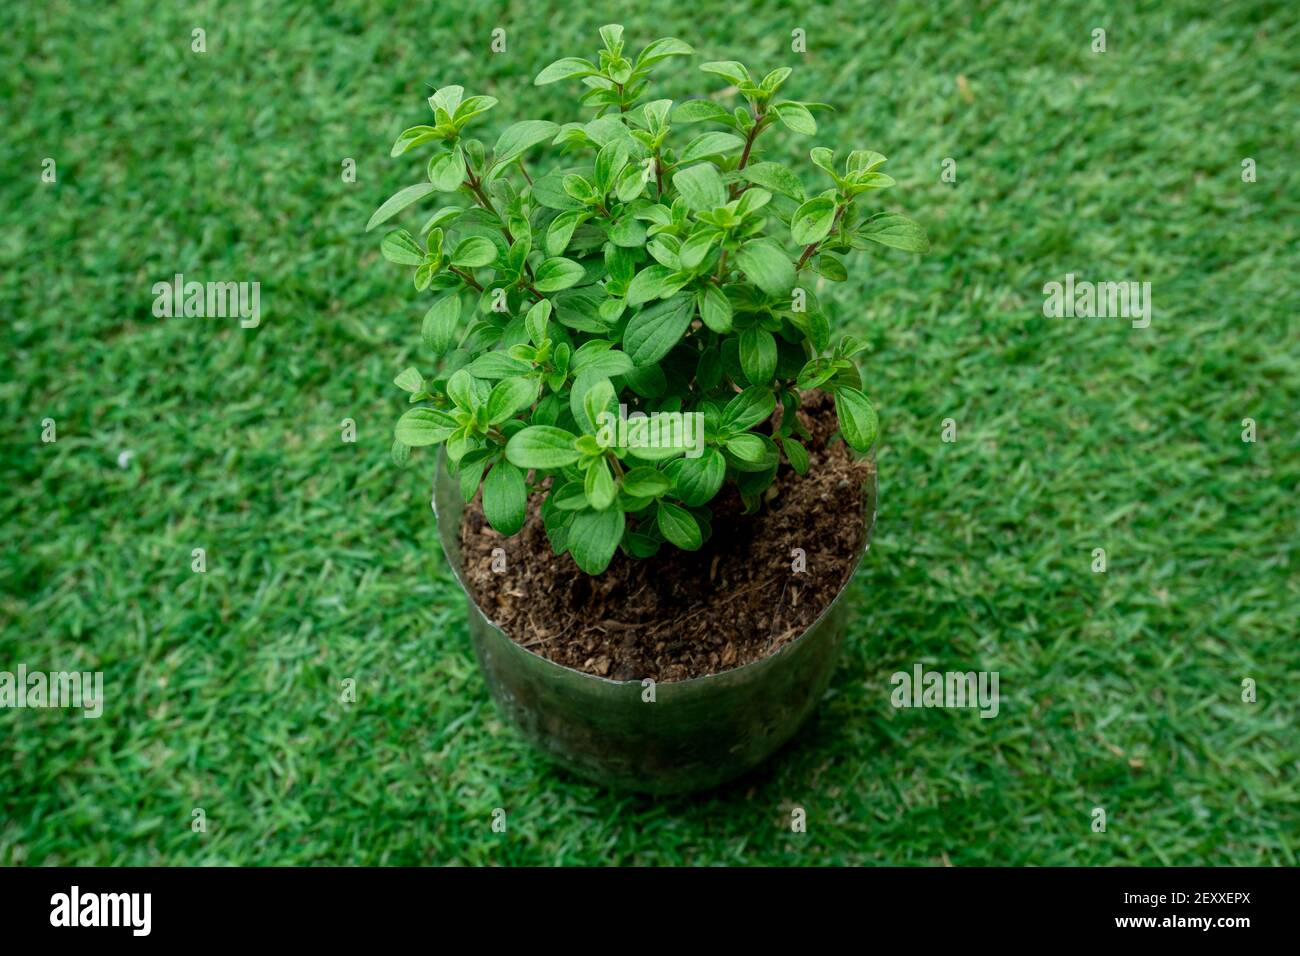 Spermacoce alata, Know as the Winged False Buttonweed in a Rustic Plastic Pot in the Garden Stock Photo